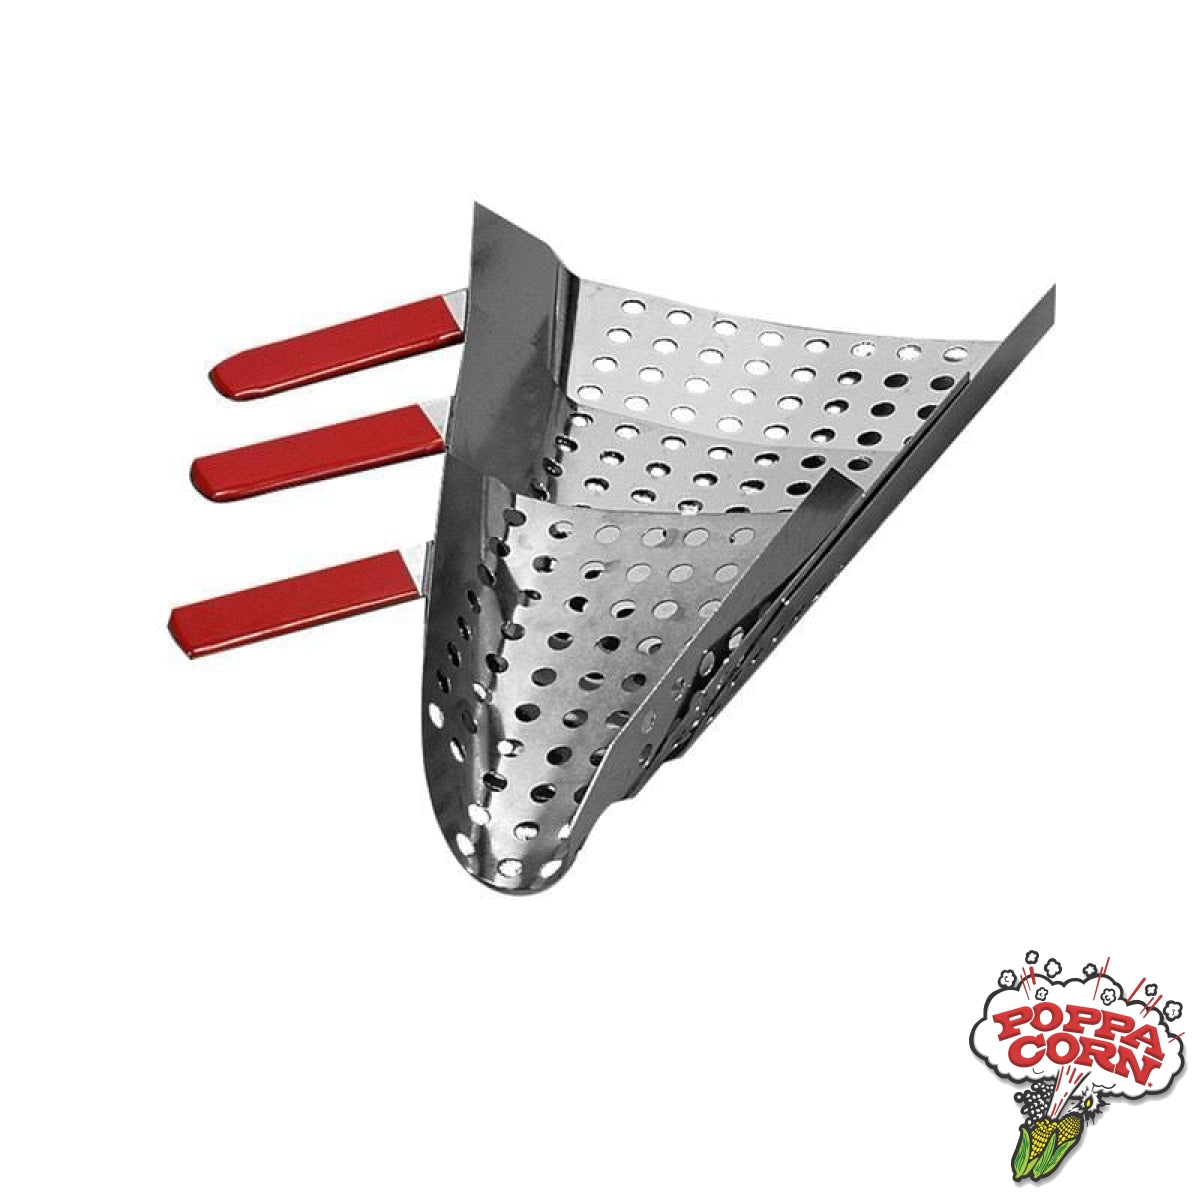 GM2084 - Left Hand Perforated Jet Scoop - Standard Size - Poppa Corn Corp